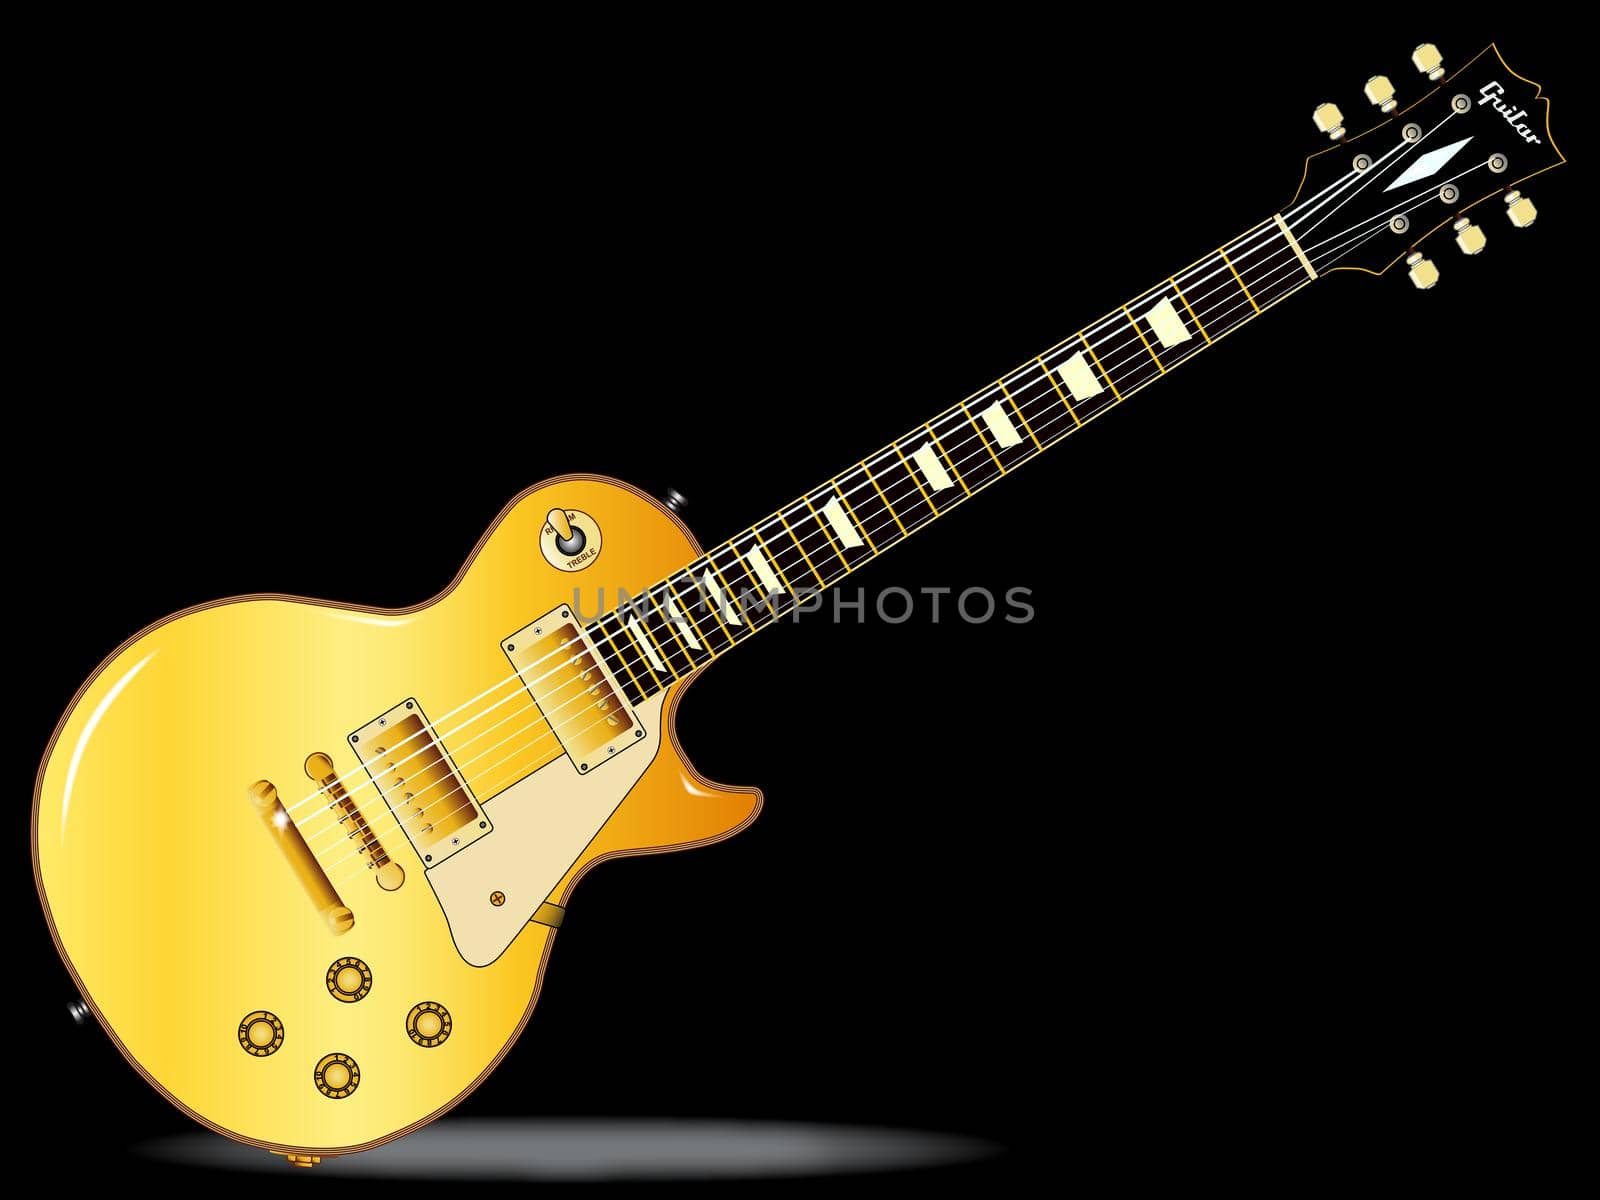 The definitive rock and roll guitar in gold isolated over a black background